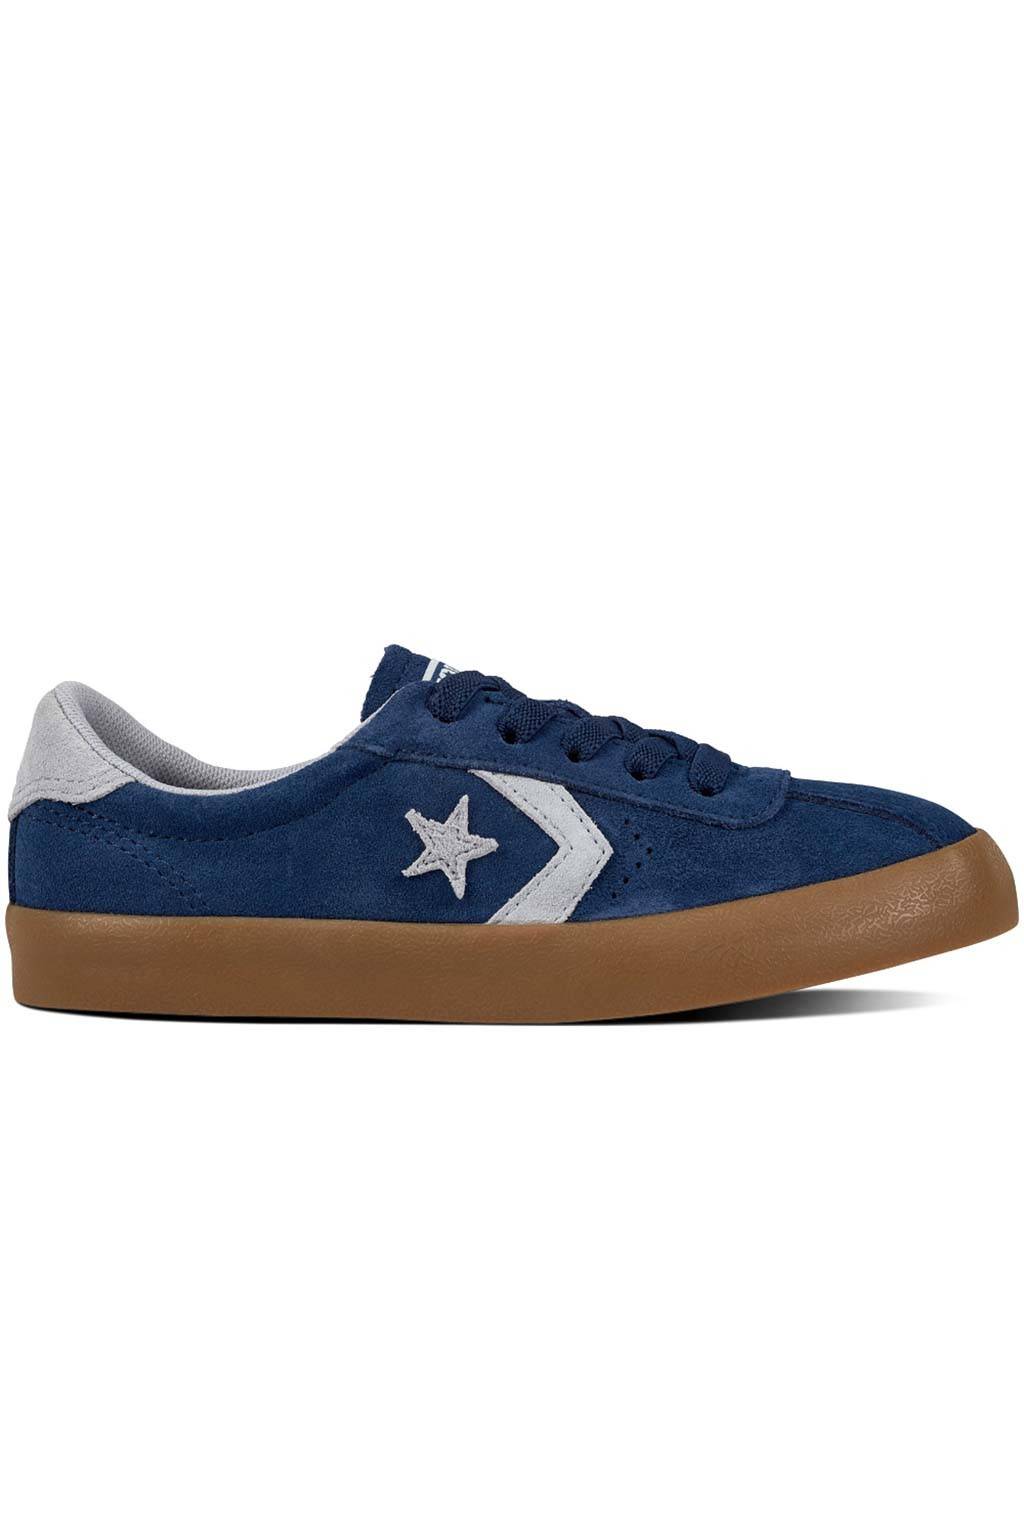 Converse breakpoint ox 660016C